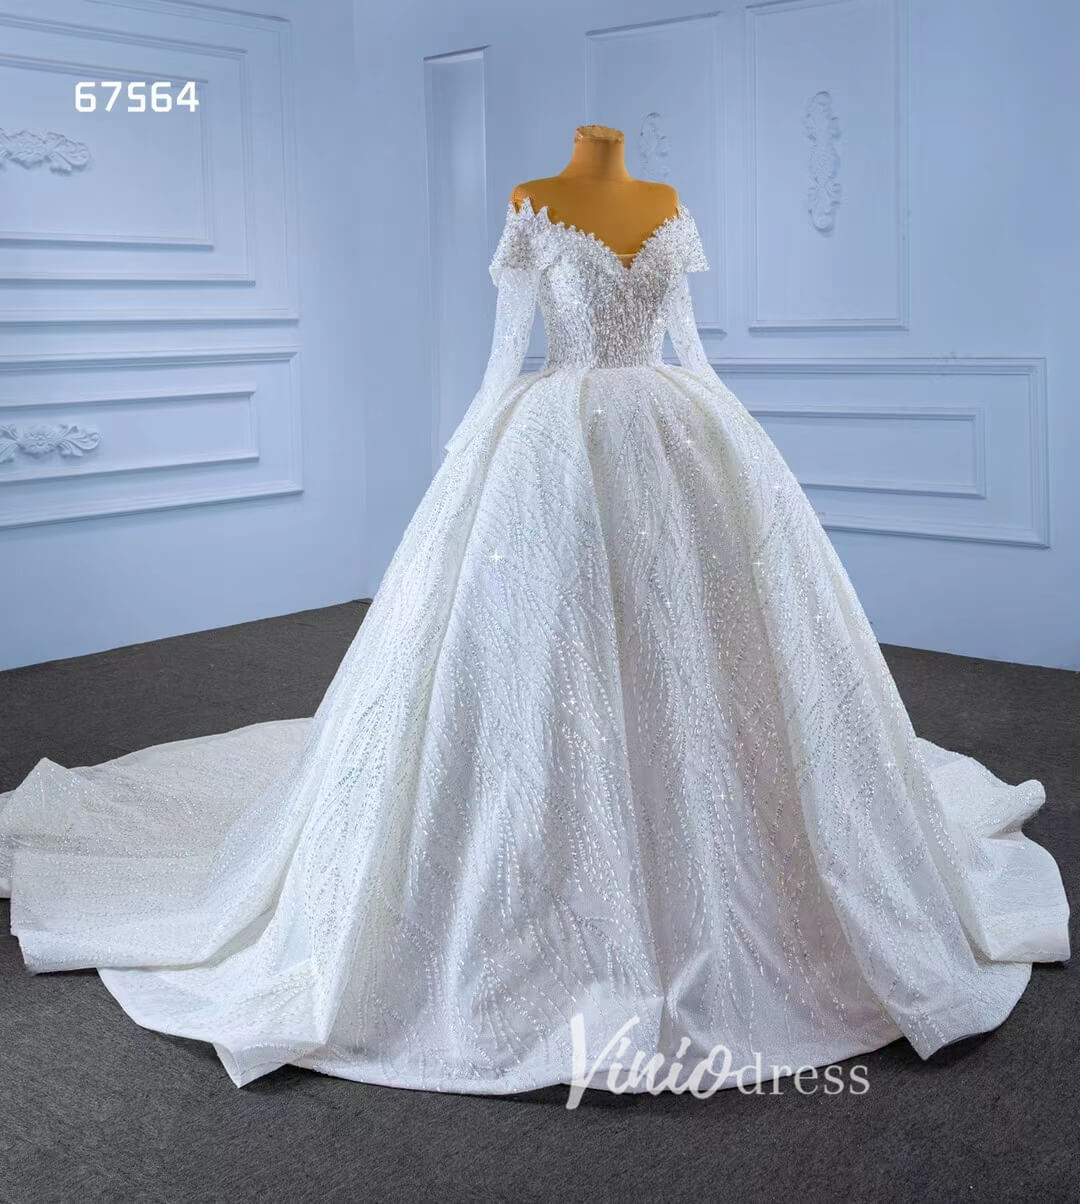 Luxury Beaded Ball Gown Wedding Dresses with Sleeves 67564-wedding dresses-Viniodress-Viniodress